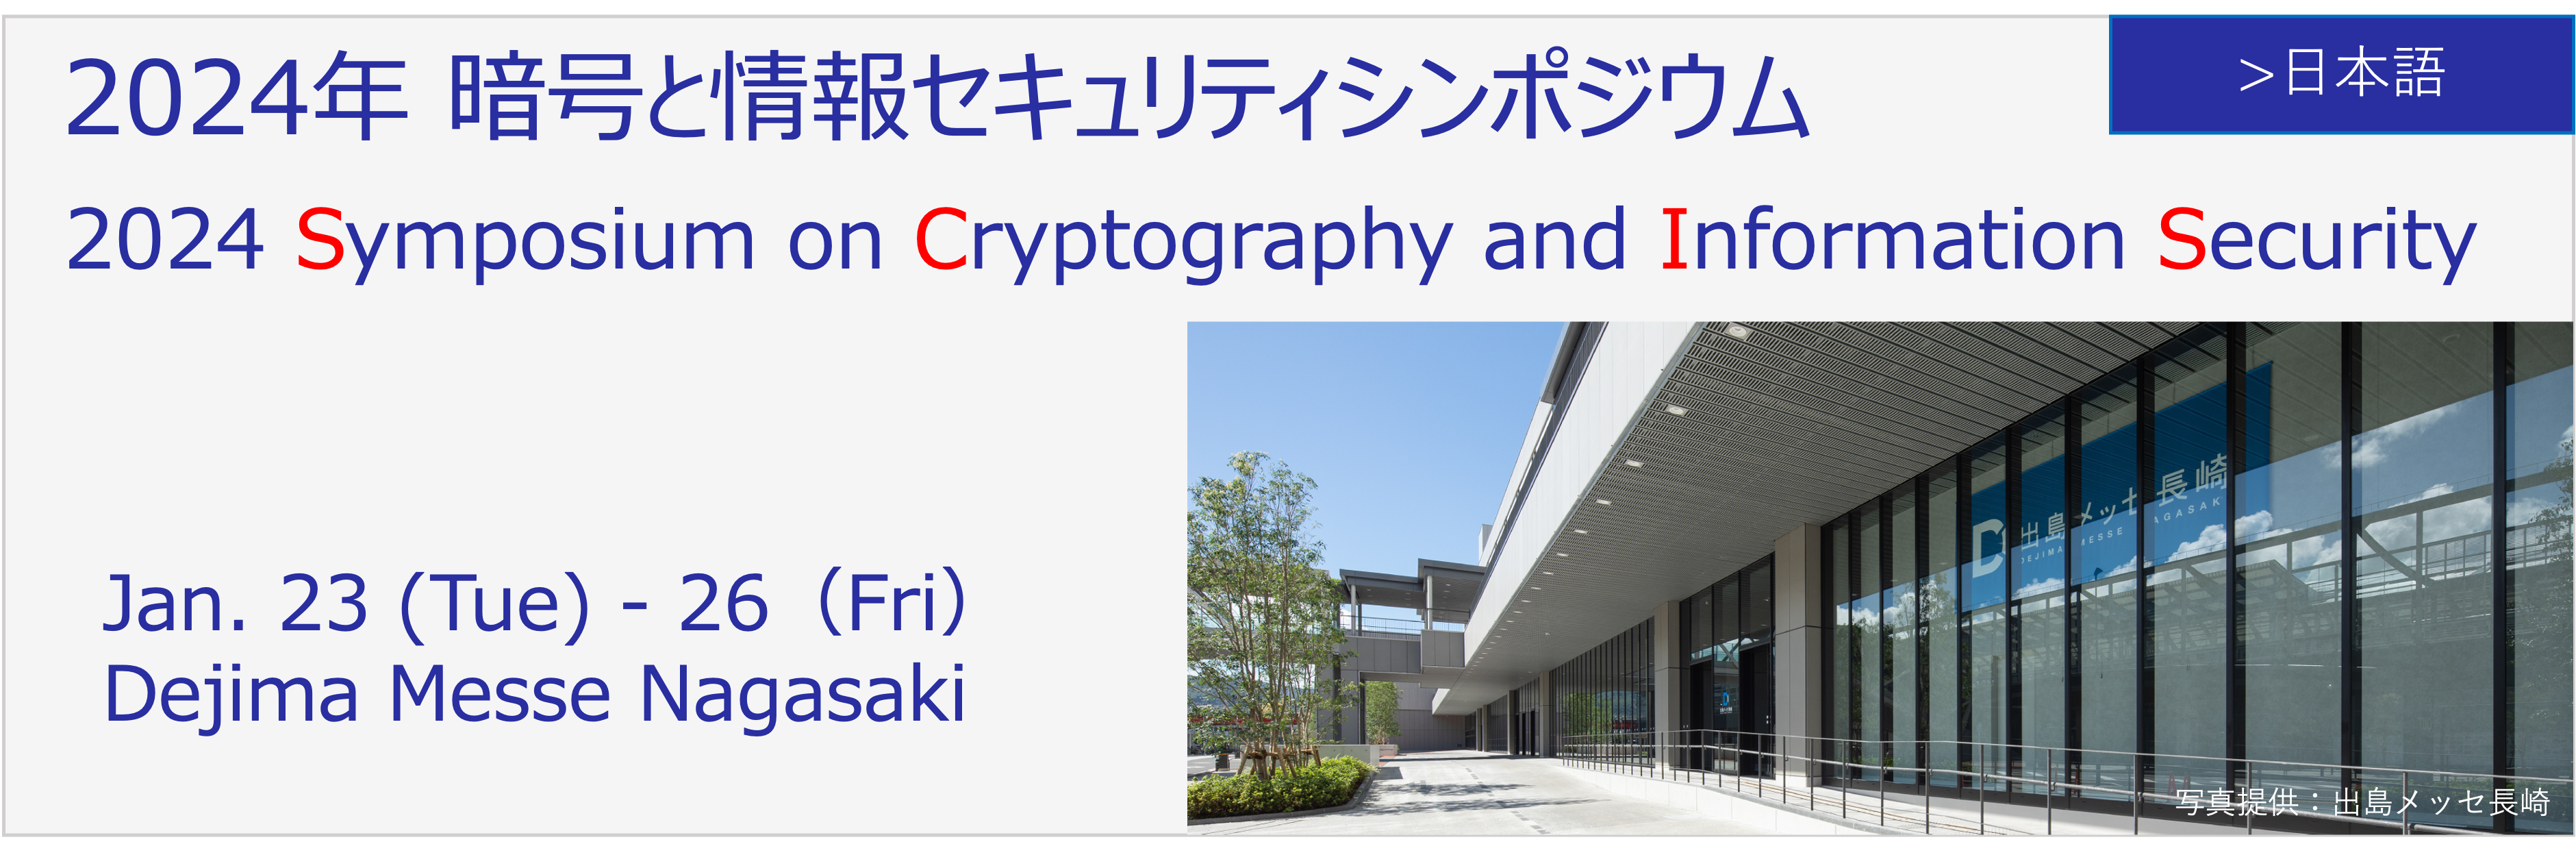 SCIS2024 2024 Symposium on Cryptography and Information Security